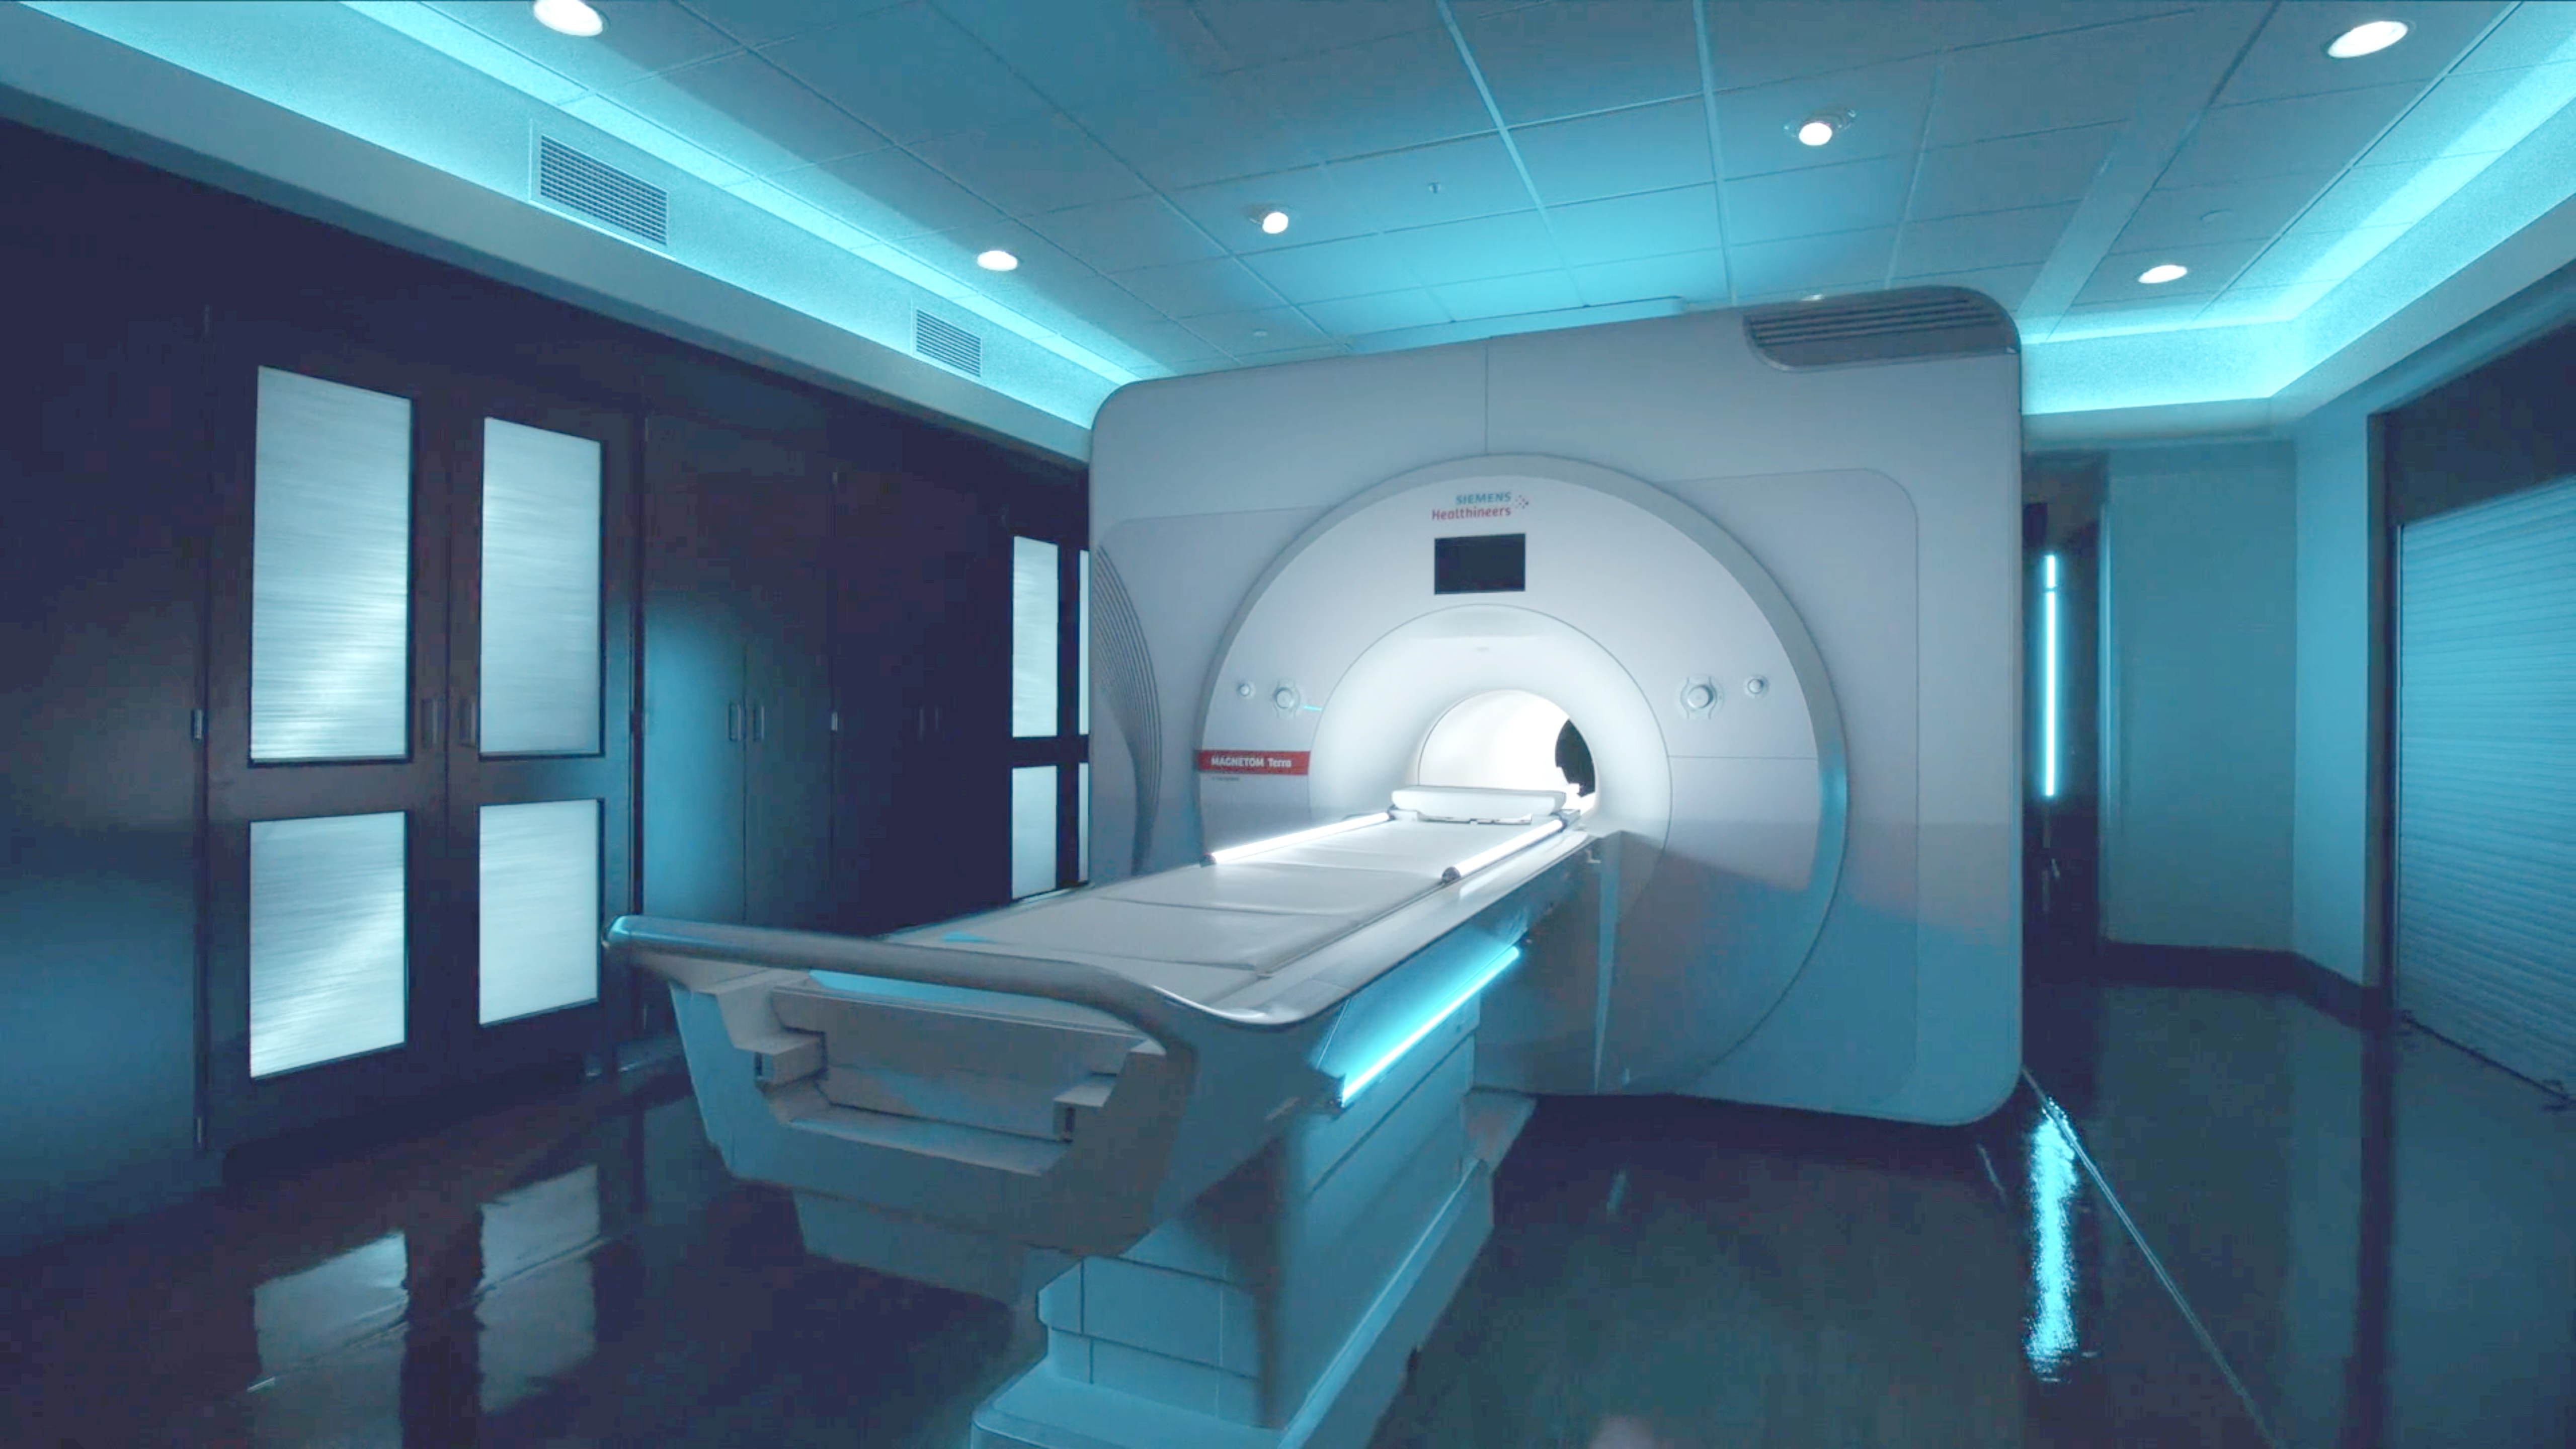 Illinois, Carle partnership kicks off intracranial hemorrhage research with state-of-the-art MRI